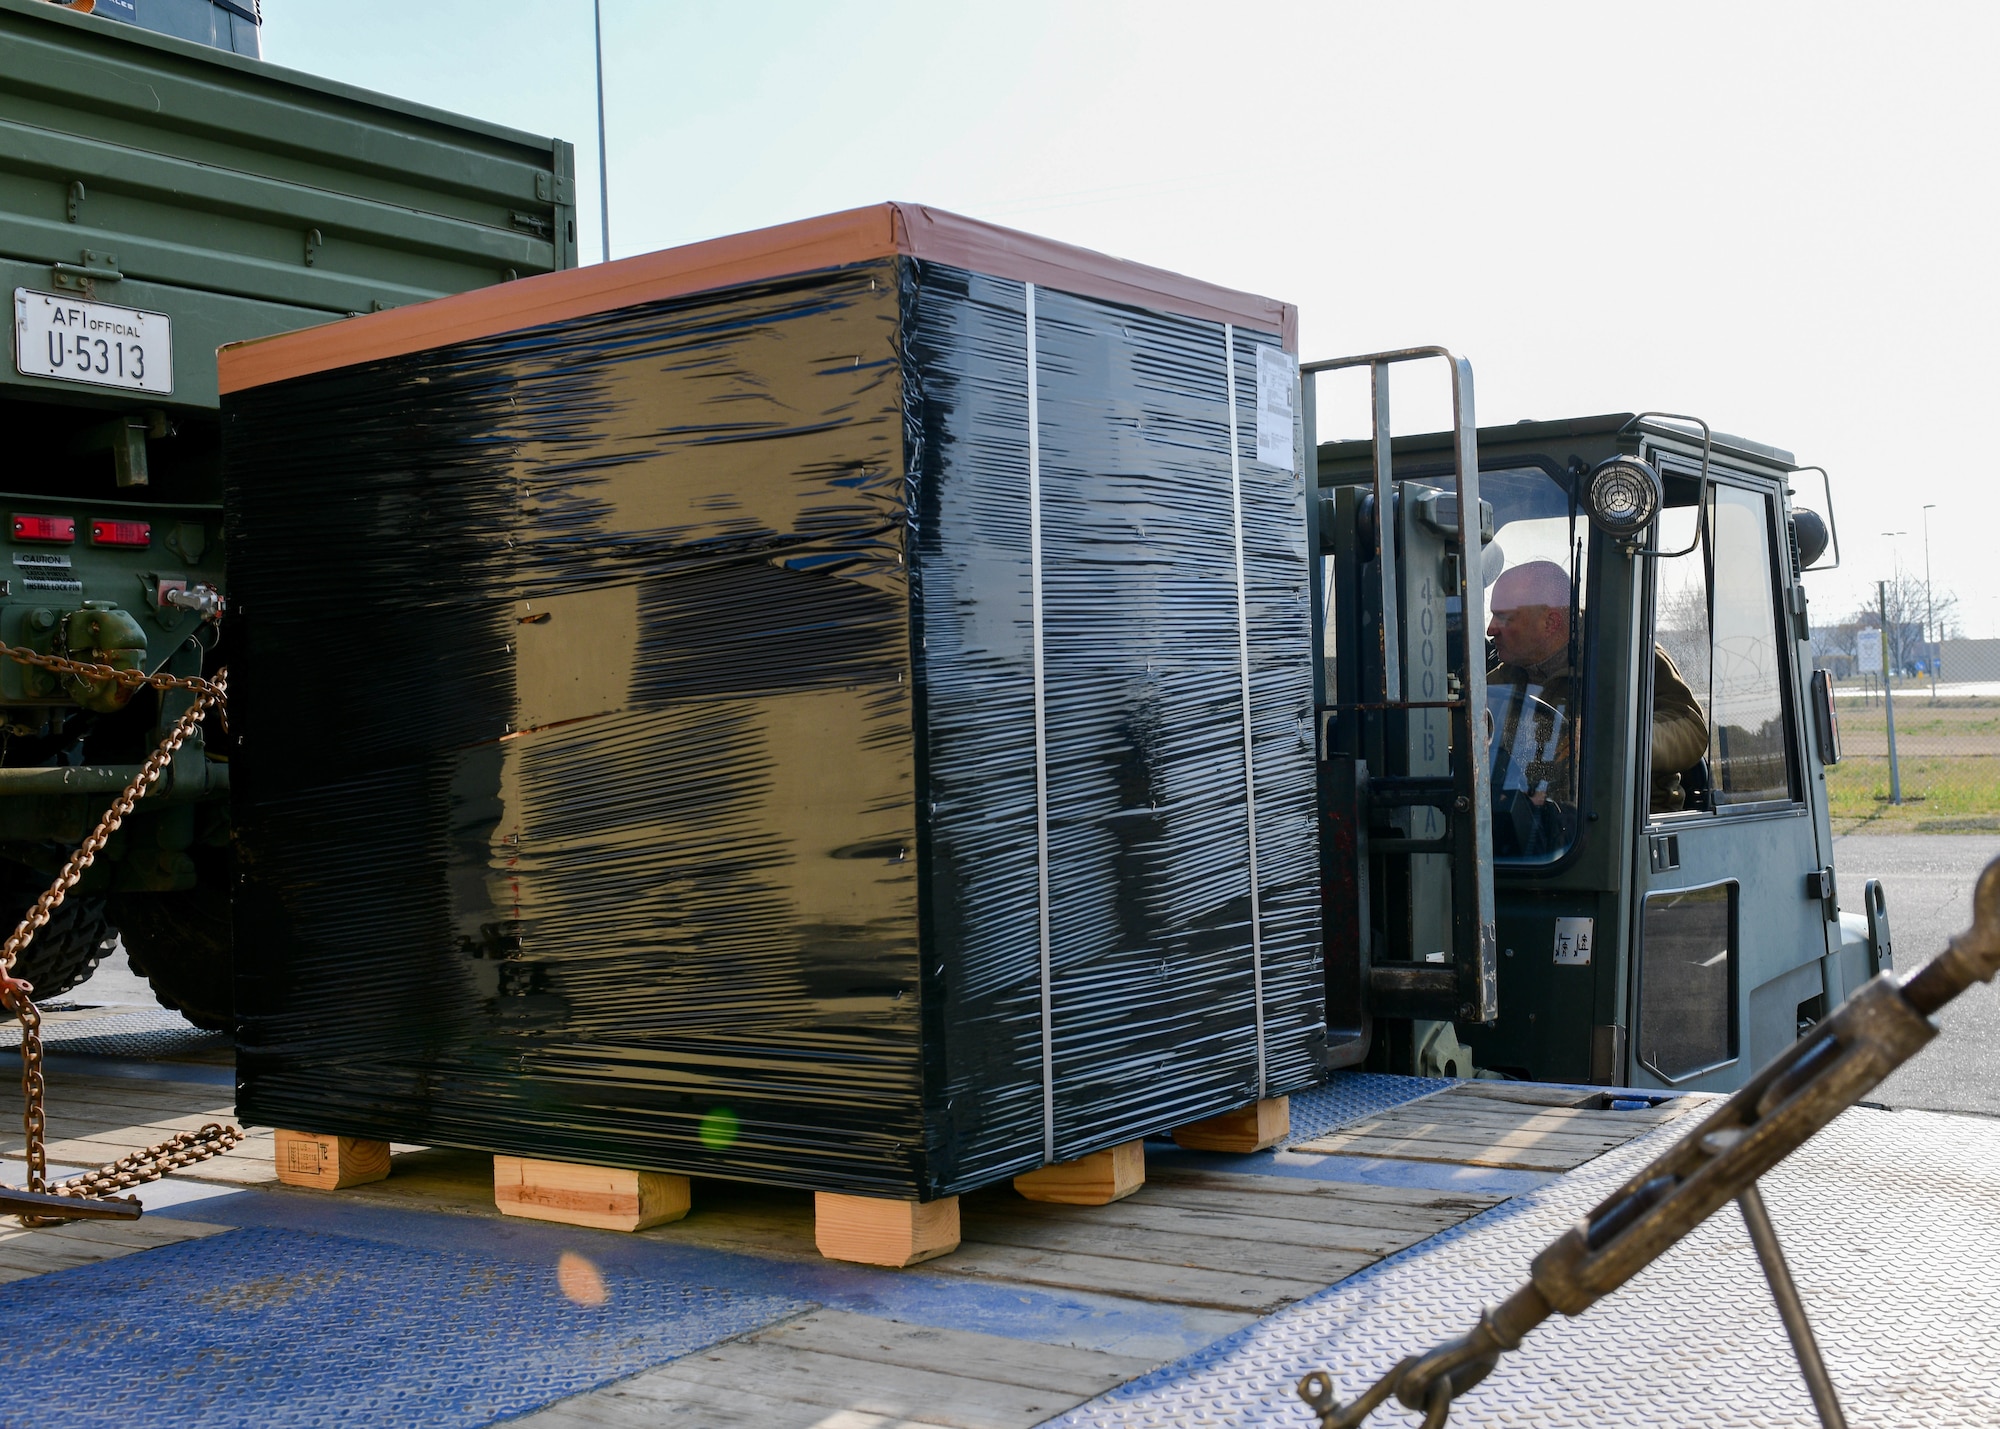 A cargo pallet is loaded onto a trailer at Aviano Air Base, Italy, March 4, 2022. The cargo pallet contained mobility bags and medical supplies and was shipped to deployed 31st Fighter Wing Airmen in Eastern Europe. (U.S. Air Force photo by Senior Airman Brooke Moeder)